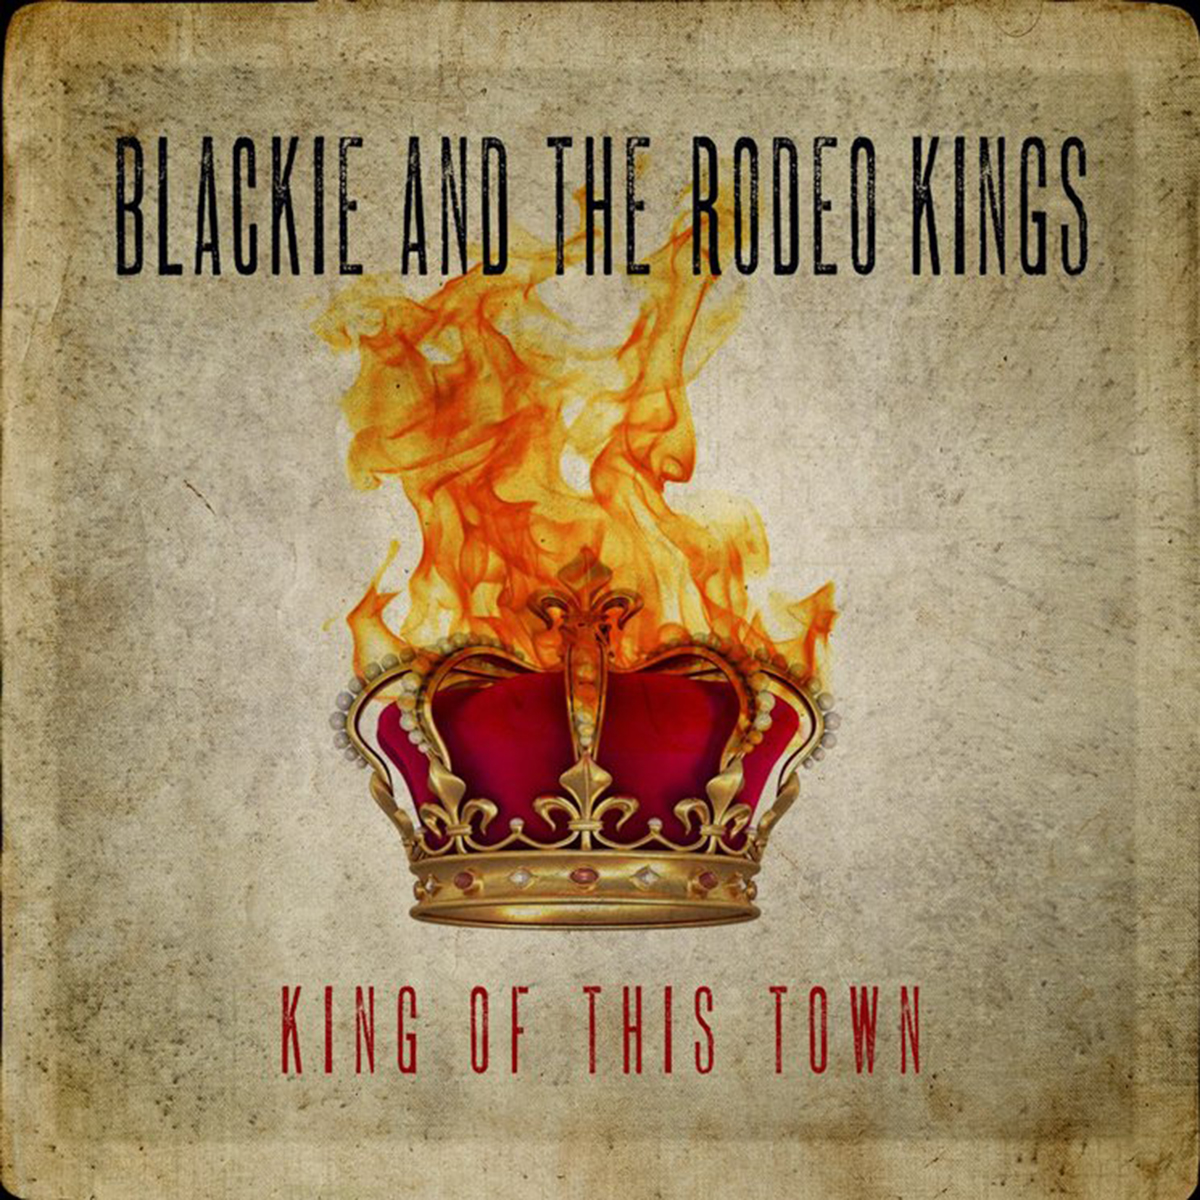 Blackie And The Rodeo Kings Announce Record Deal With Warner Music Canada